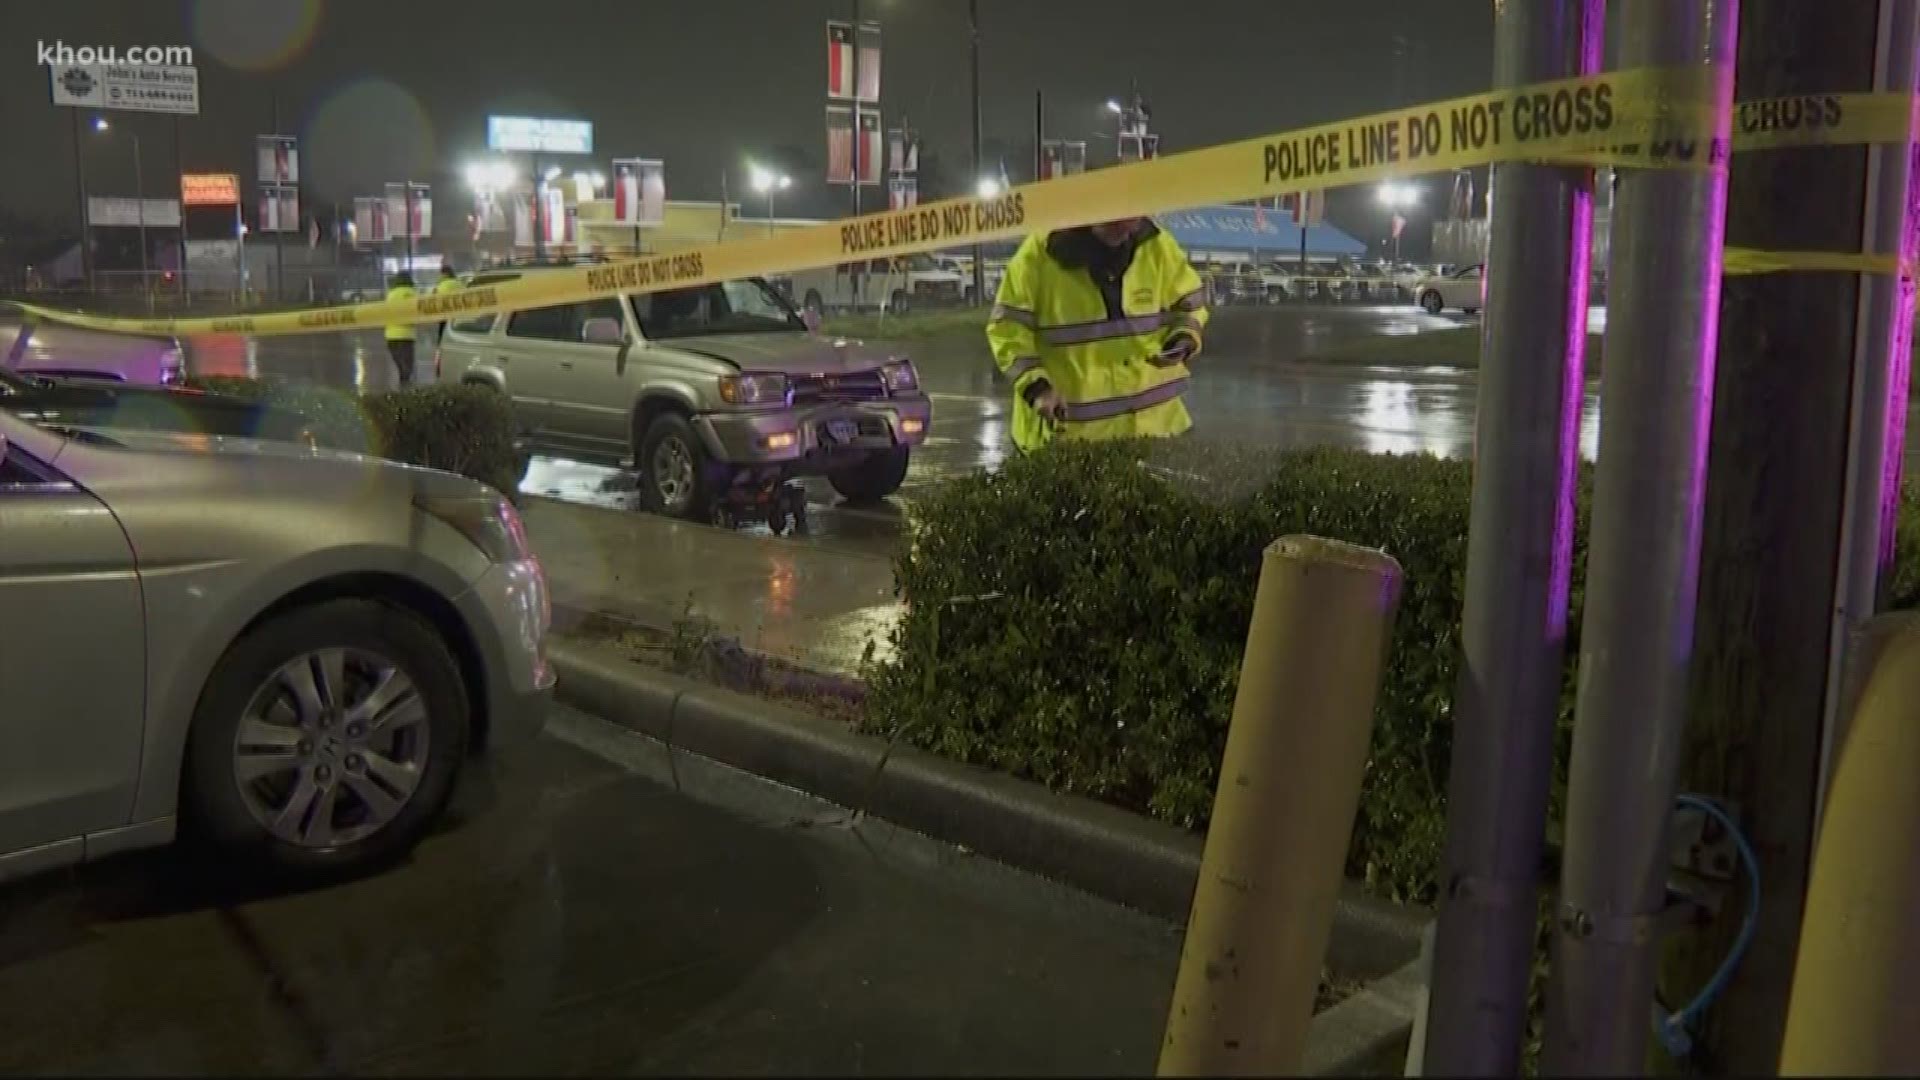 An elderly woman has died after she was struck by a car Wednesday night in northwest Houston.